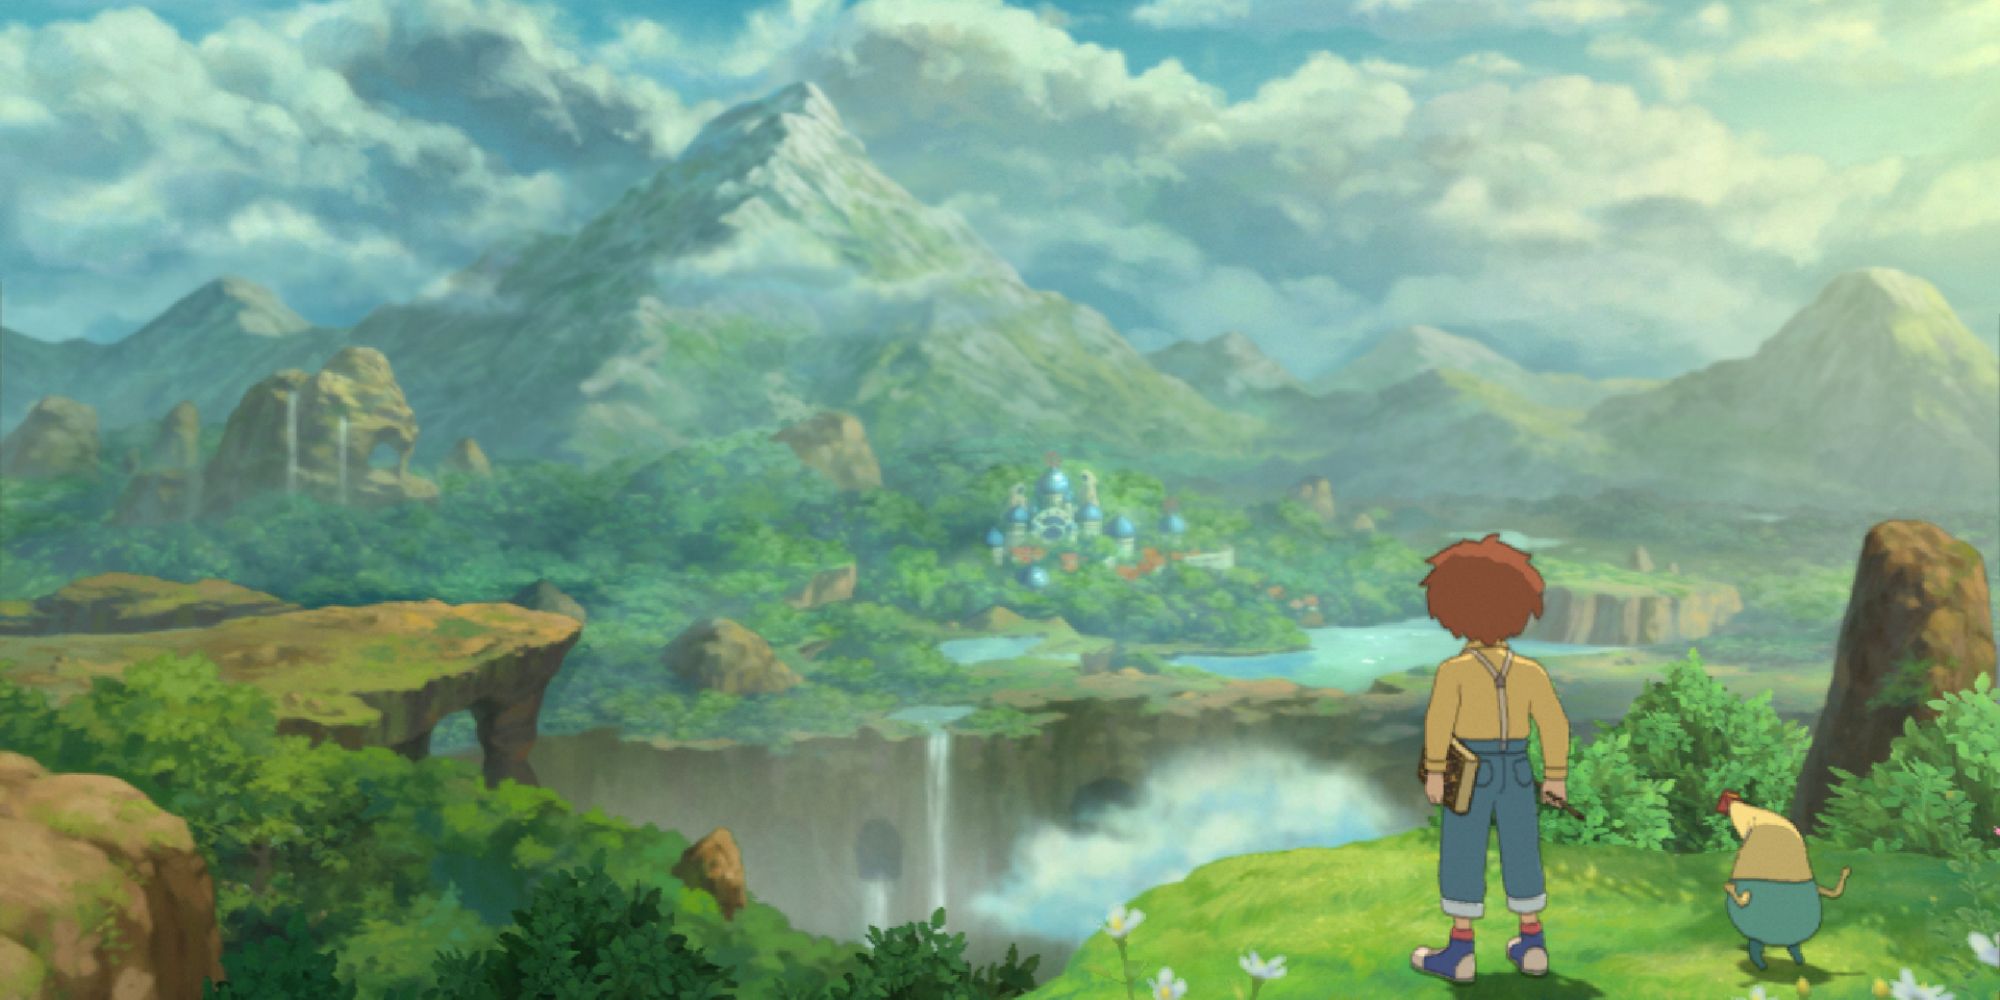 Awide shot of Oliver and Drippy from Ni No Kuni Wrath Of The White Witch on a cliffside overlooking a verdant landscape and the city of Ding Dong Dell in the far distance